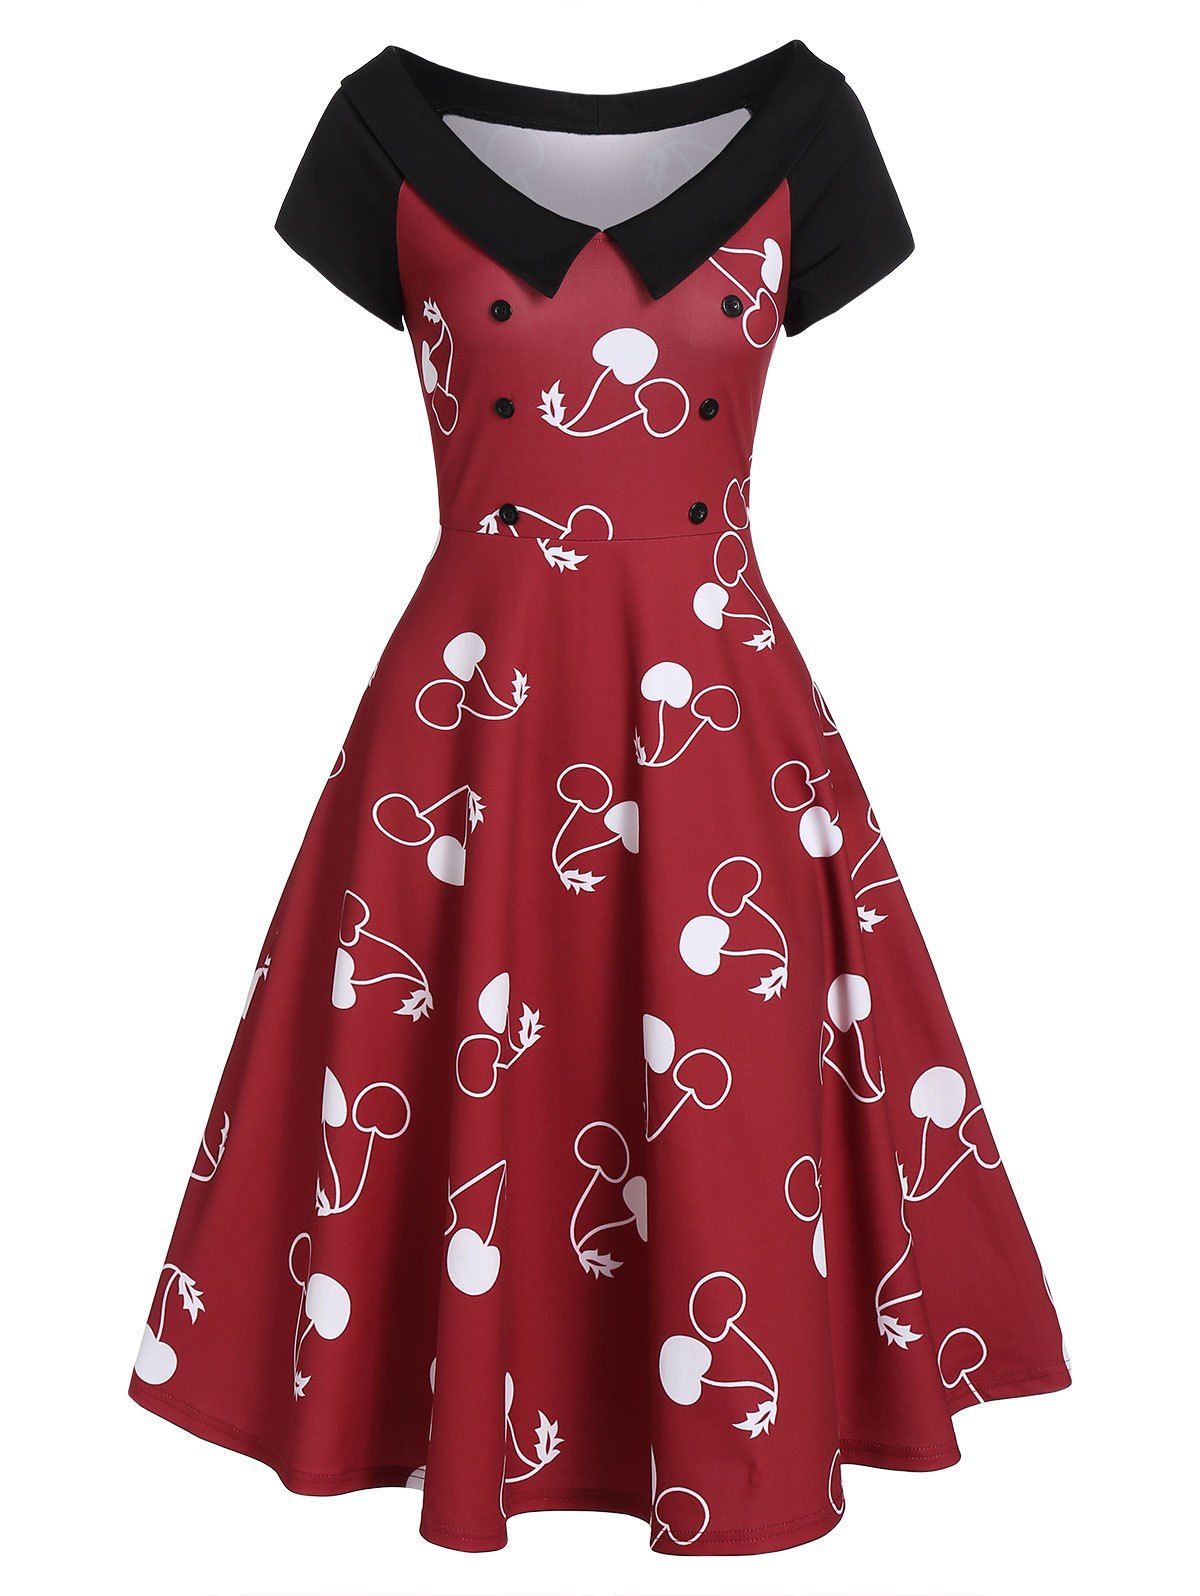 Chic Vintage Cherry Printed Pin Up Dress  